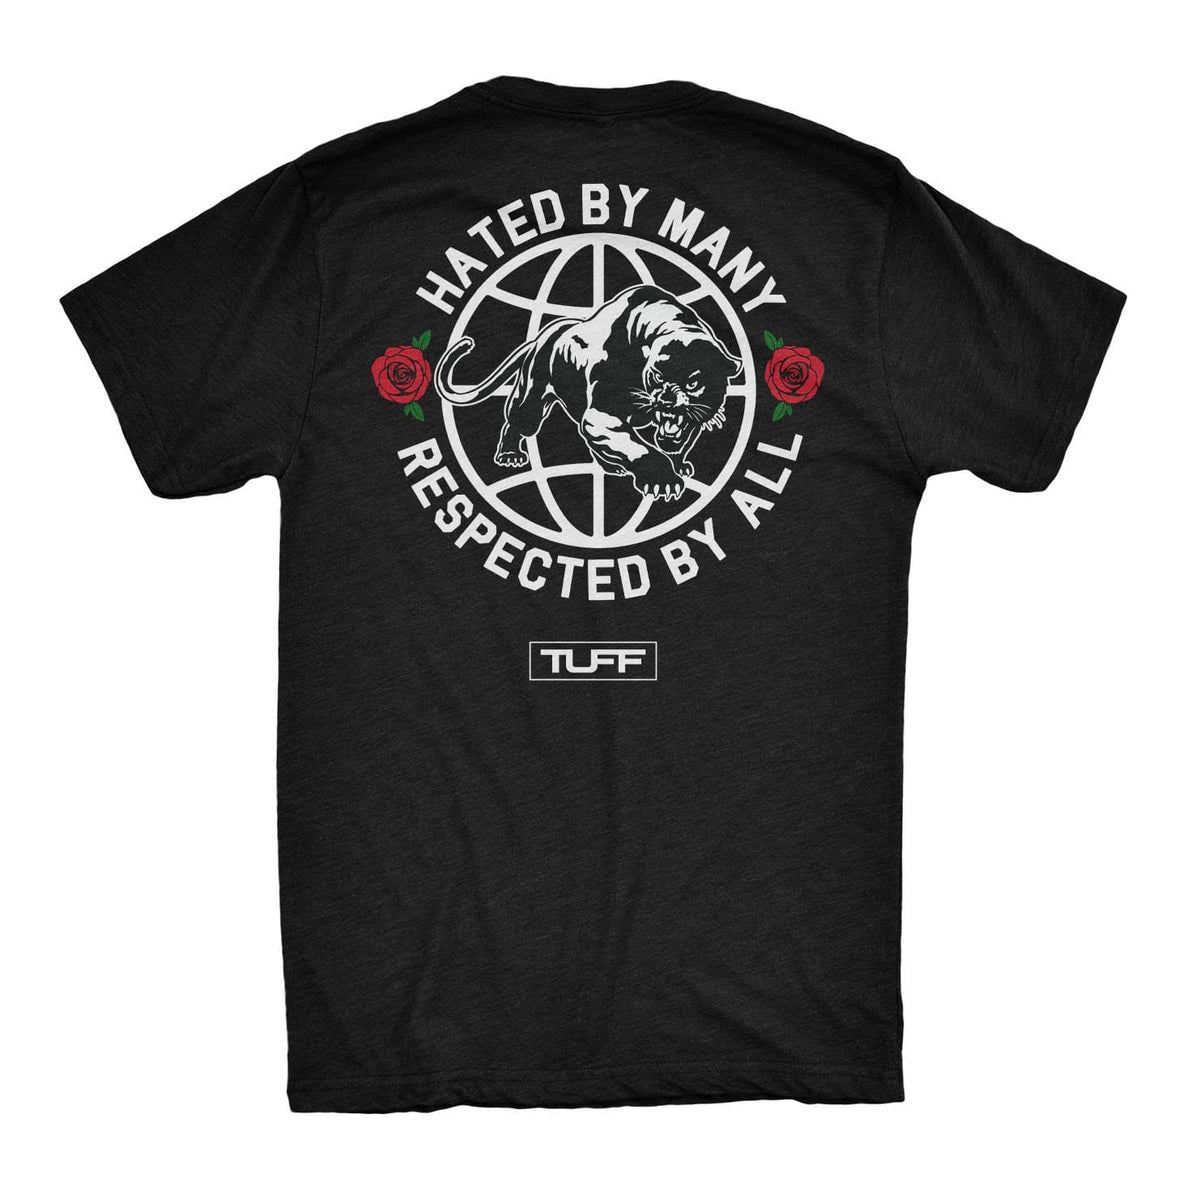 Hated By Many, Respected By All Tee S / Black TuffWraps.com